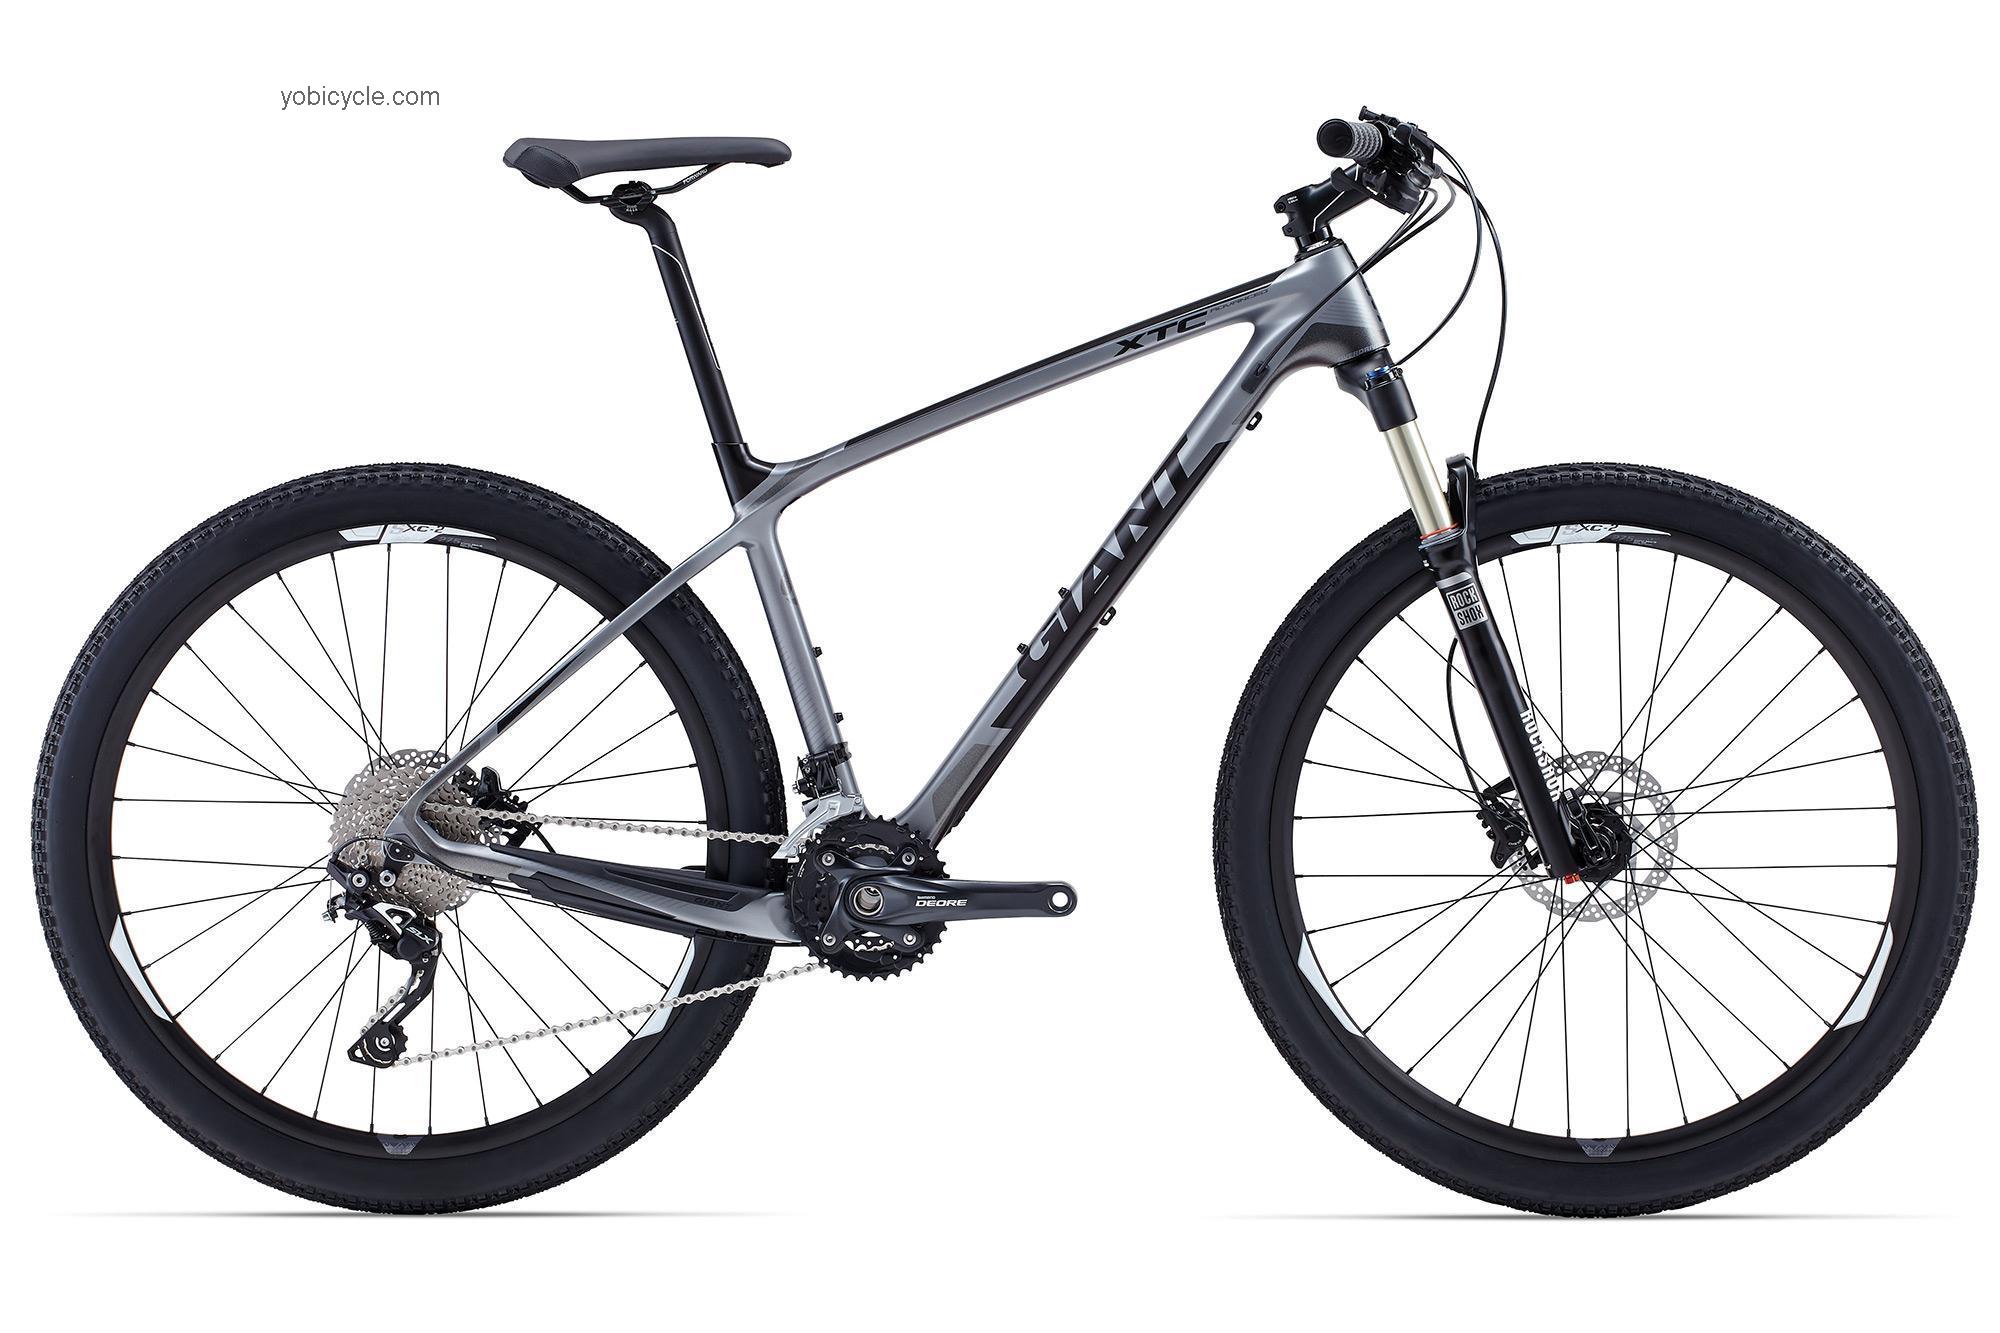 Giant XTC Advanced 27.5 3 2015 comparison online with competitors